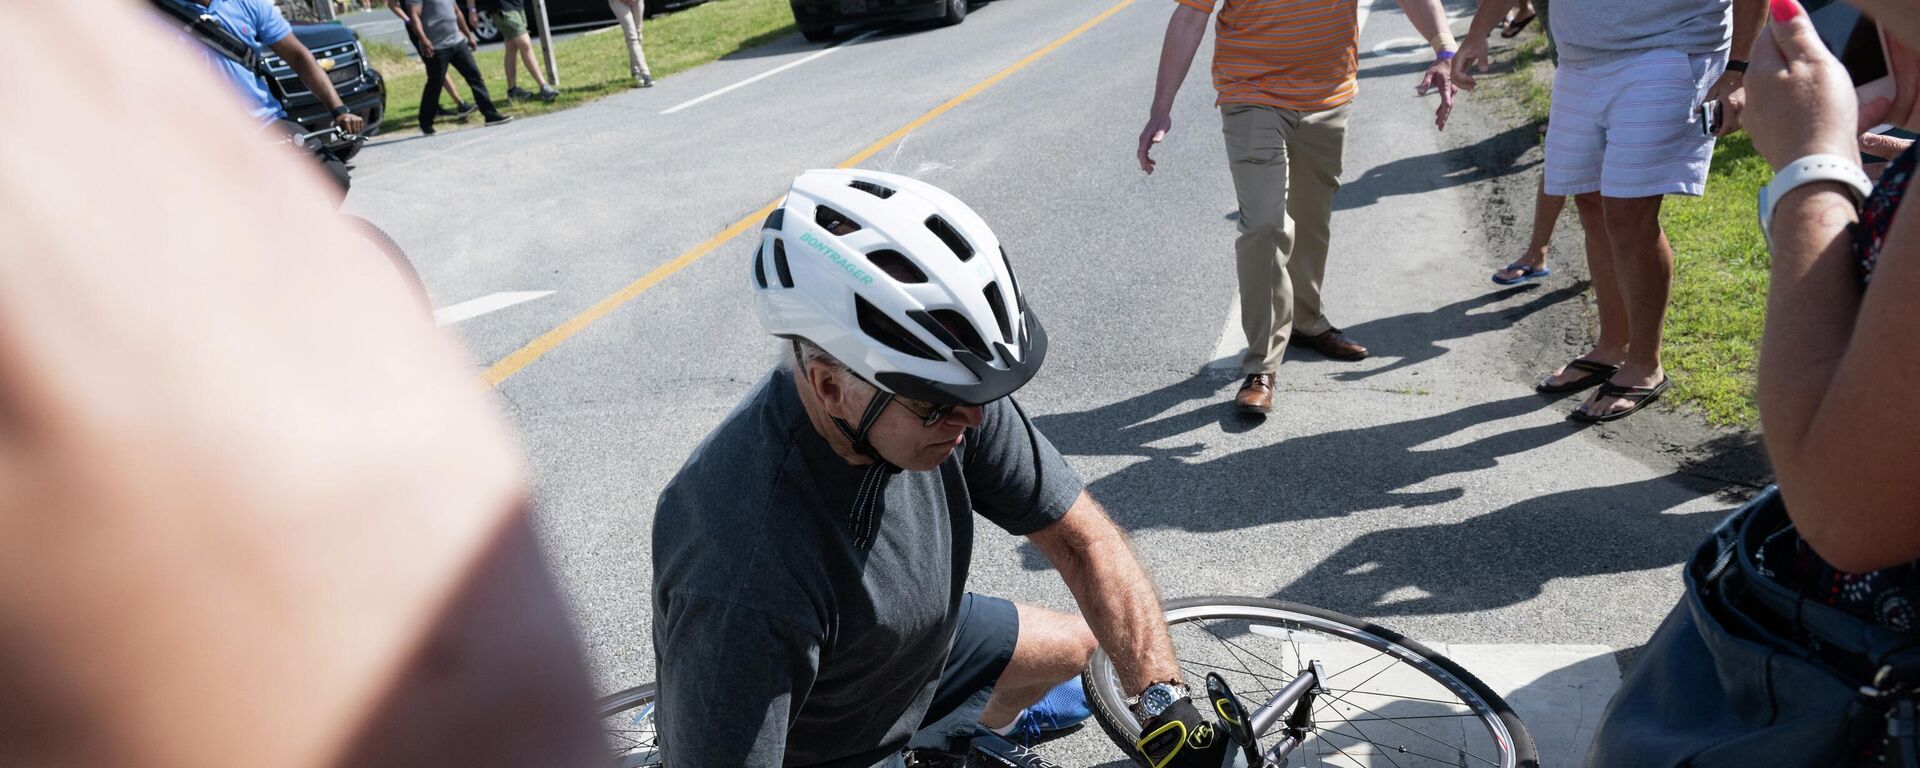 US President Joe Biden falls off his bicycle as he approaches well-wishers following a bike ride at Gordon's Pond State Park in Rehoboth Beach, Delaware, on June 18, 2022 - Sputnik International, 1920, 18.06.2022